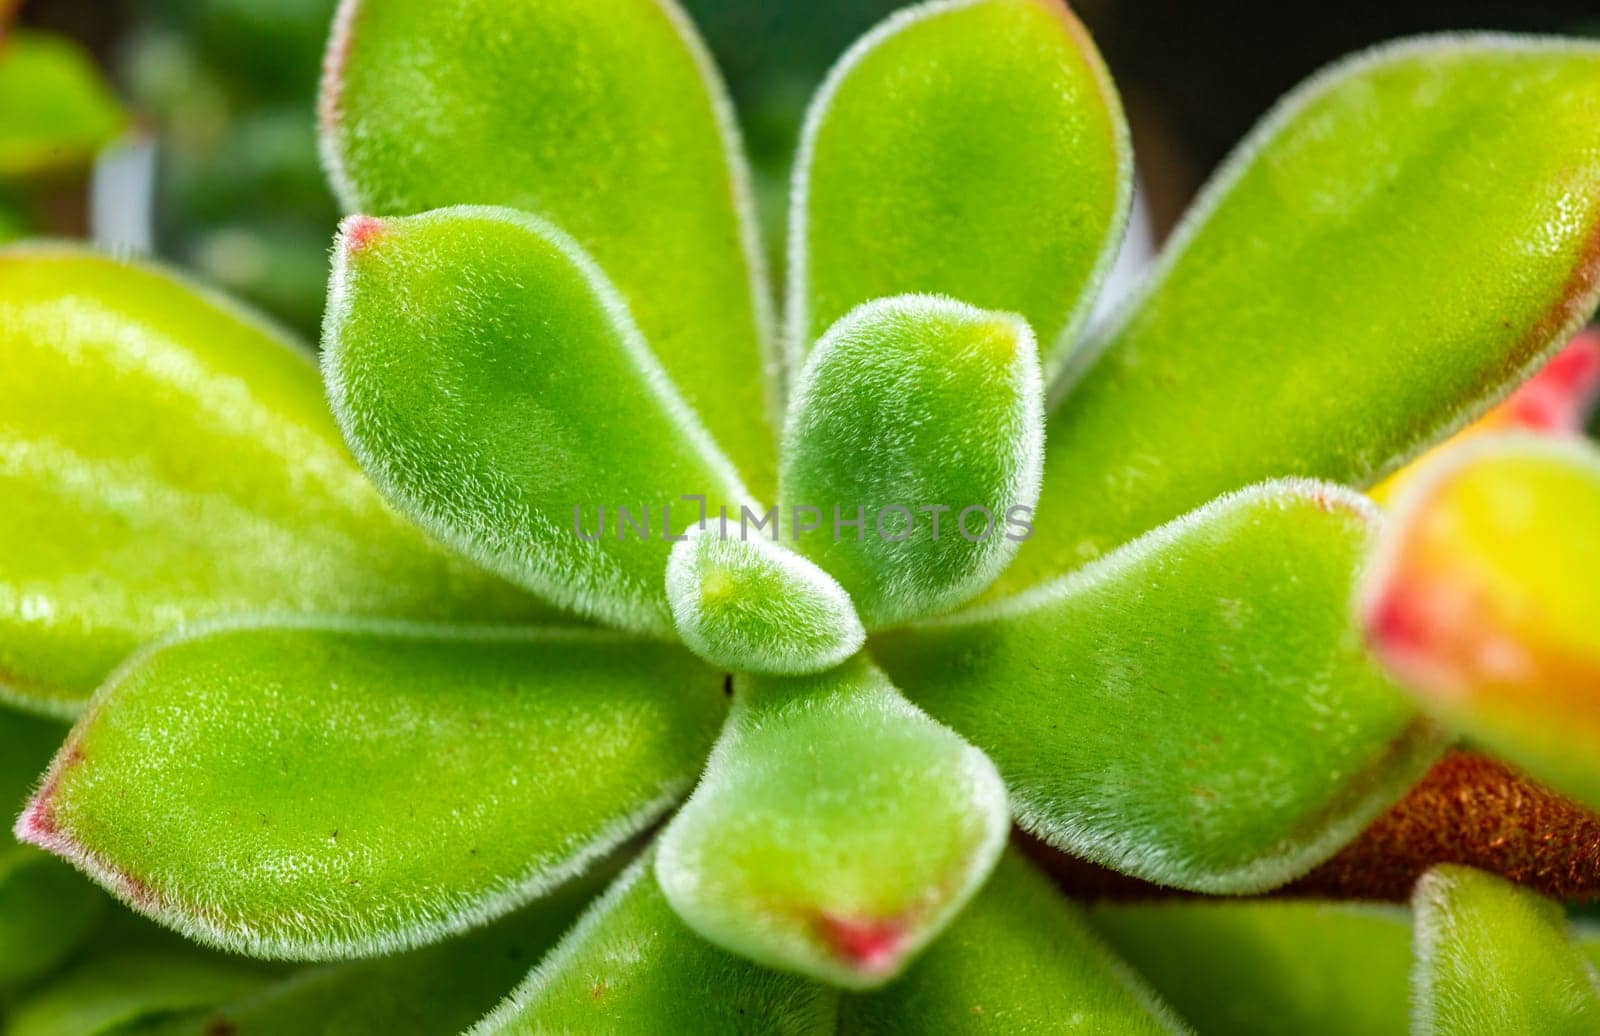 Close-up, succulent leaves of a succulent plant (Echeveria sp.) in a botanical collection